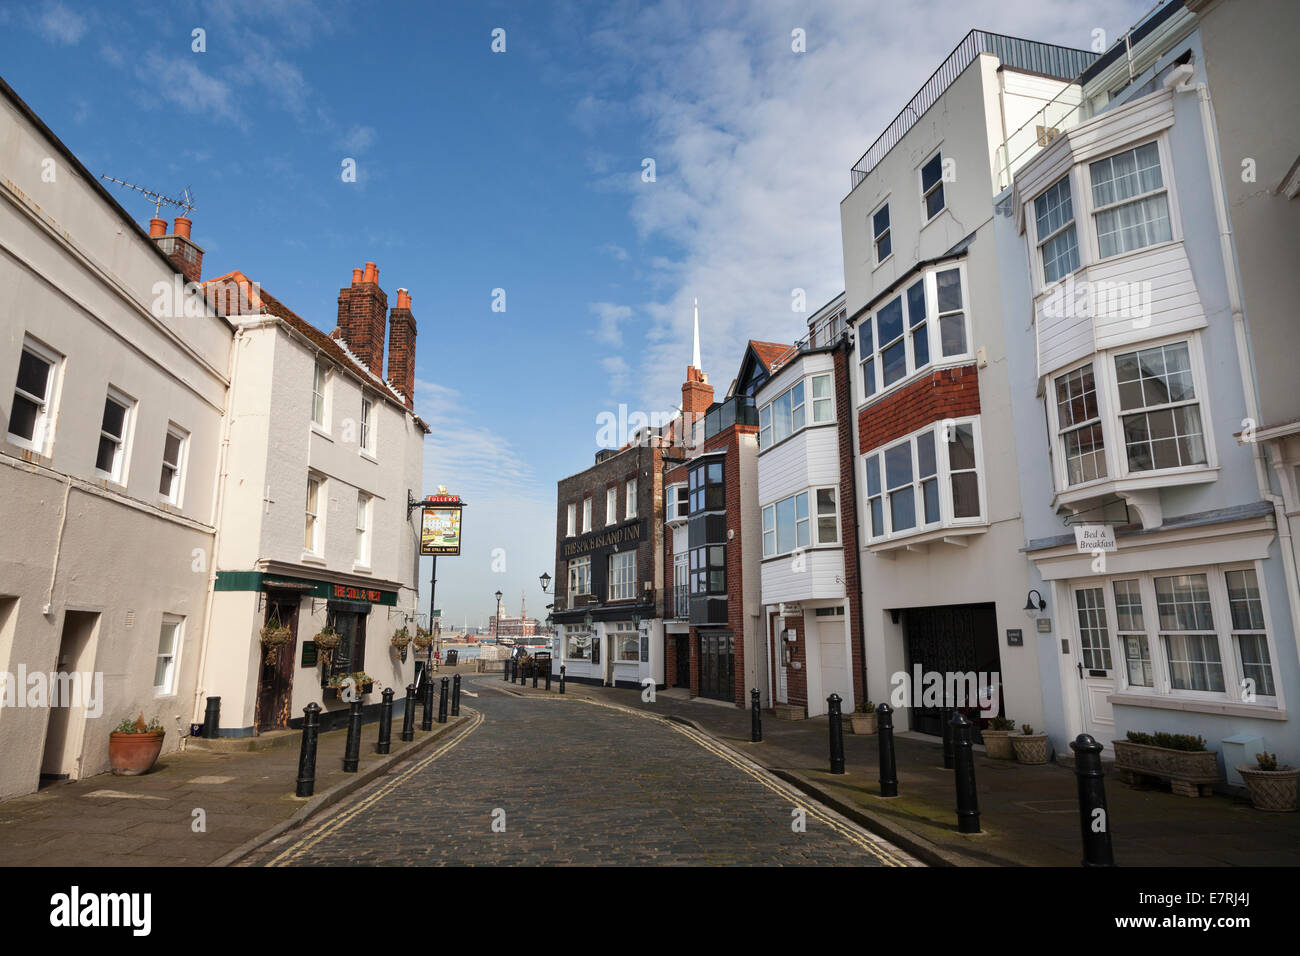 Cobbled streets of Spice Island, Old Portsmouth. Stock Photo